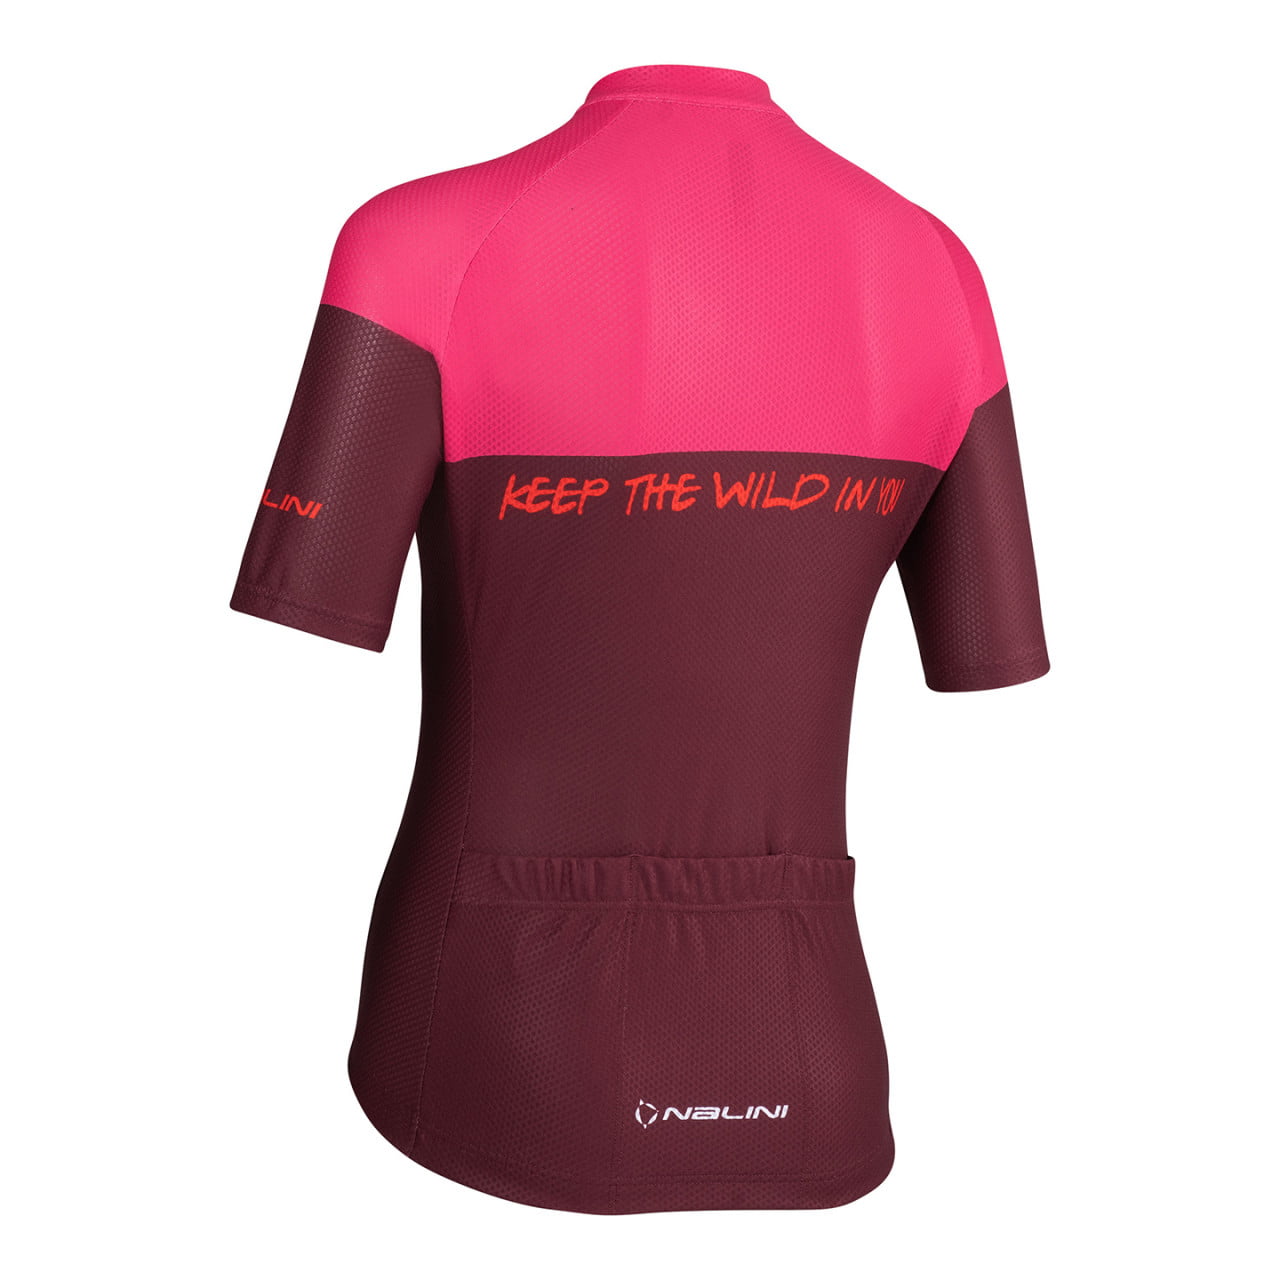 Maillot femme Trail